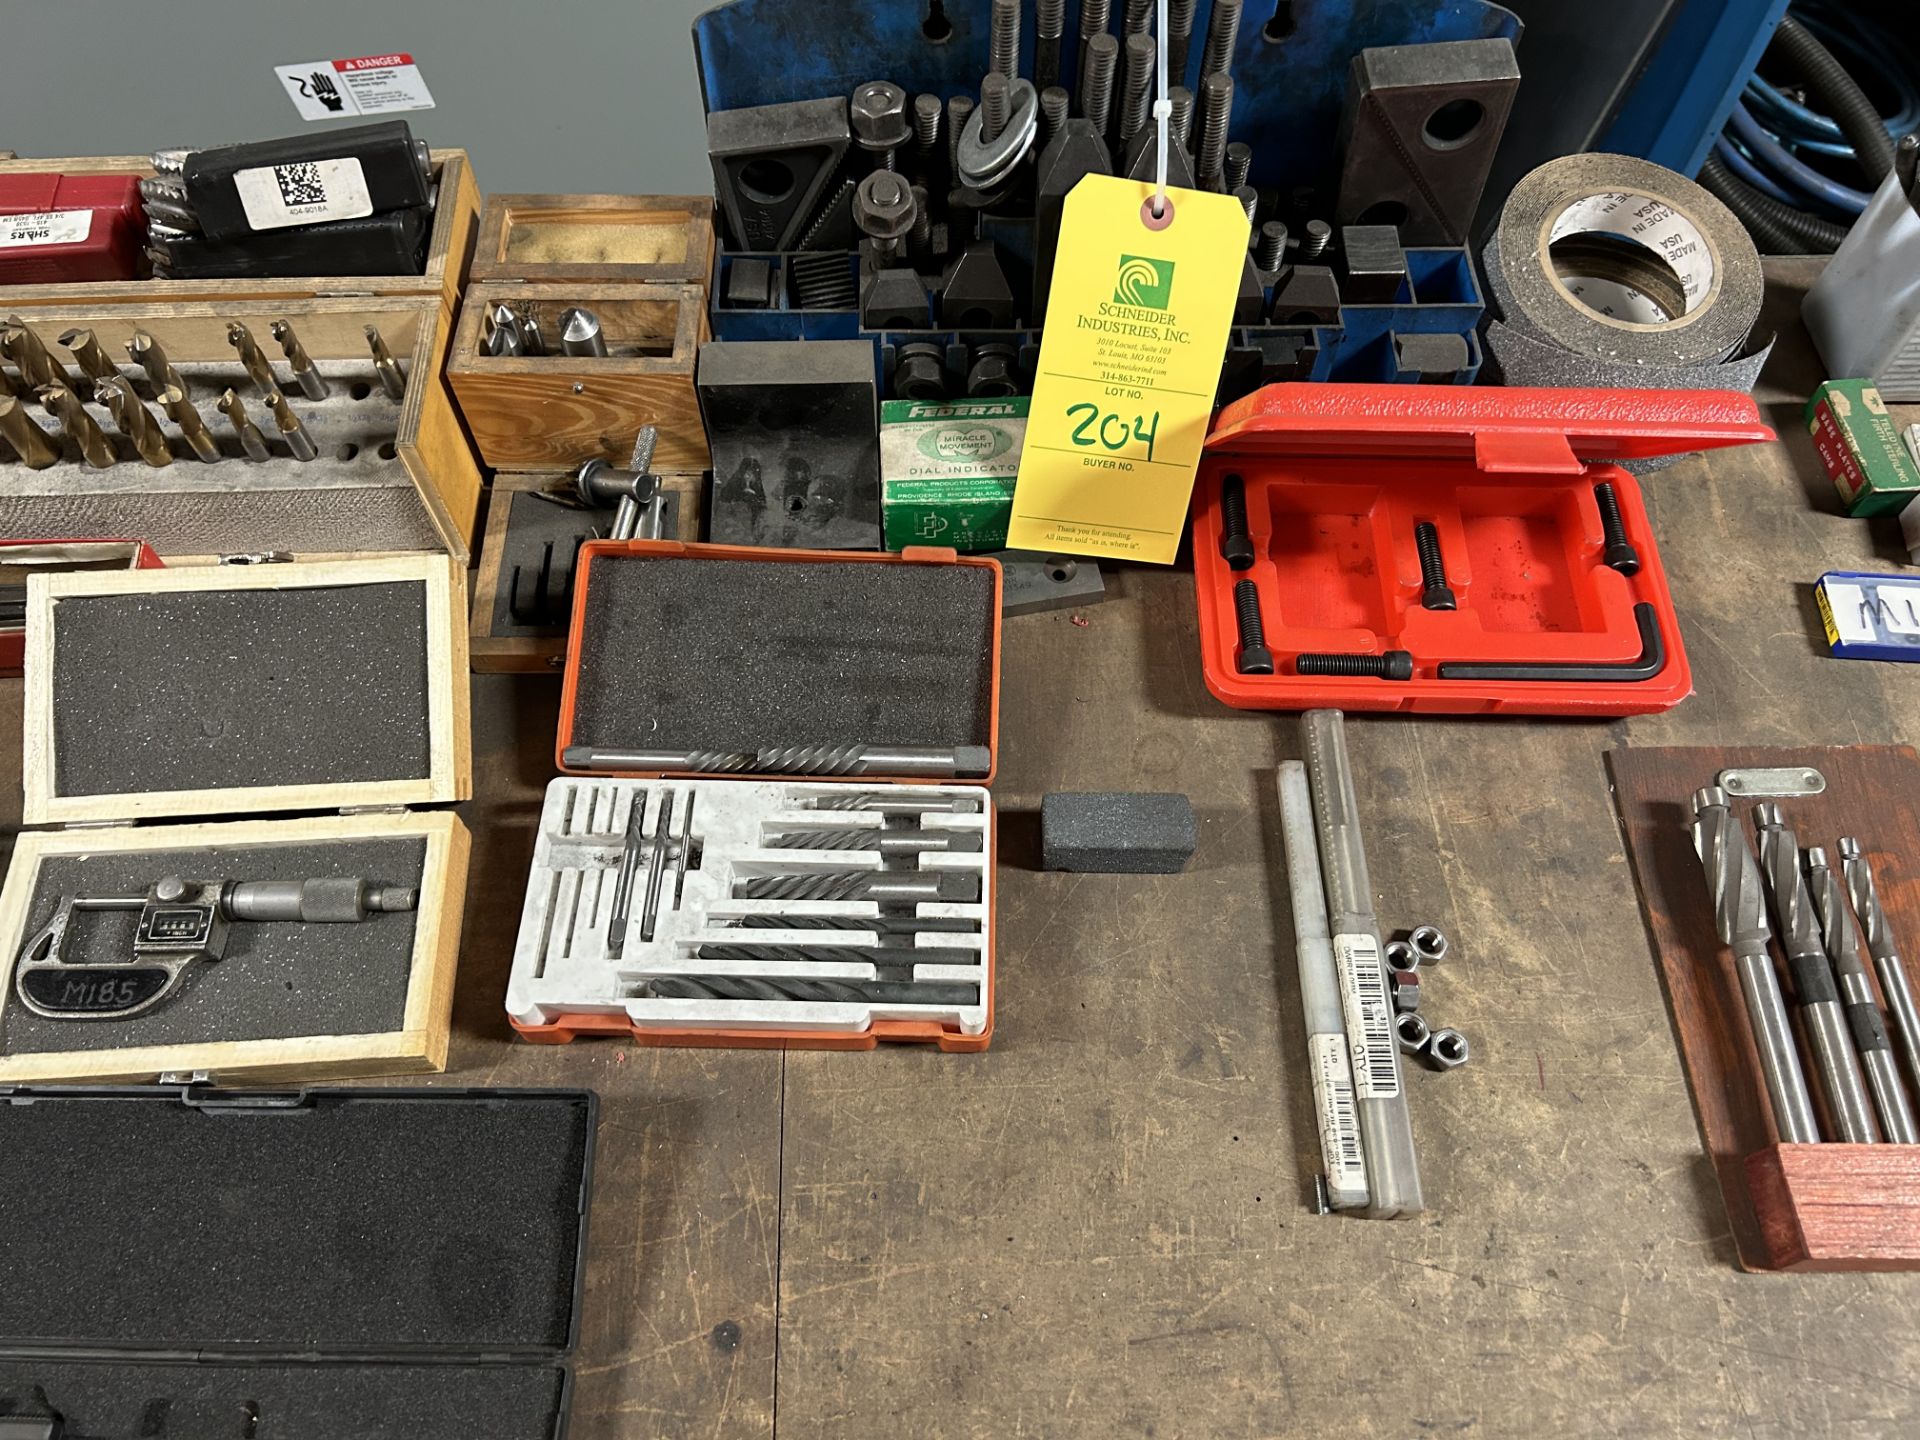 Milling Bits, Hand Tools, Measurement Tools (Does Not Include Table), Rigging/Loading Fee: $30 - Image 4 of 7